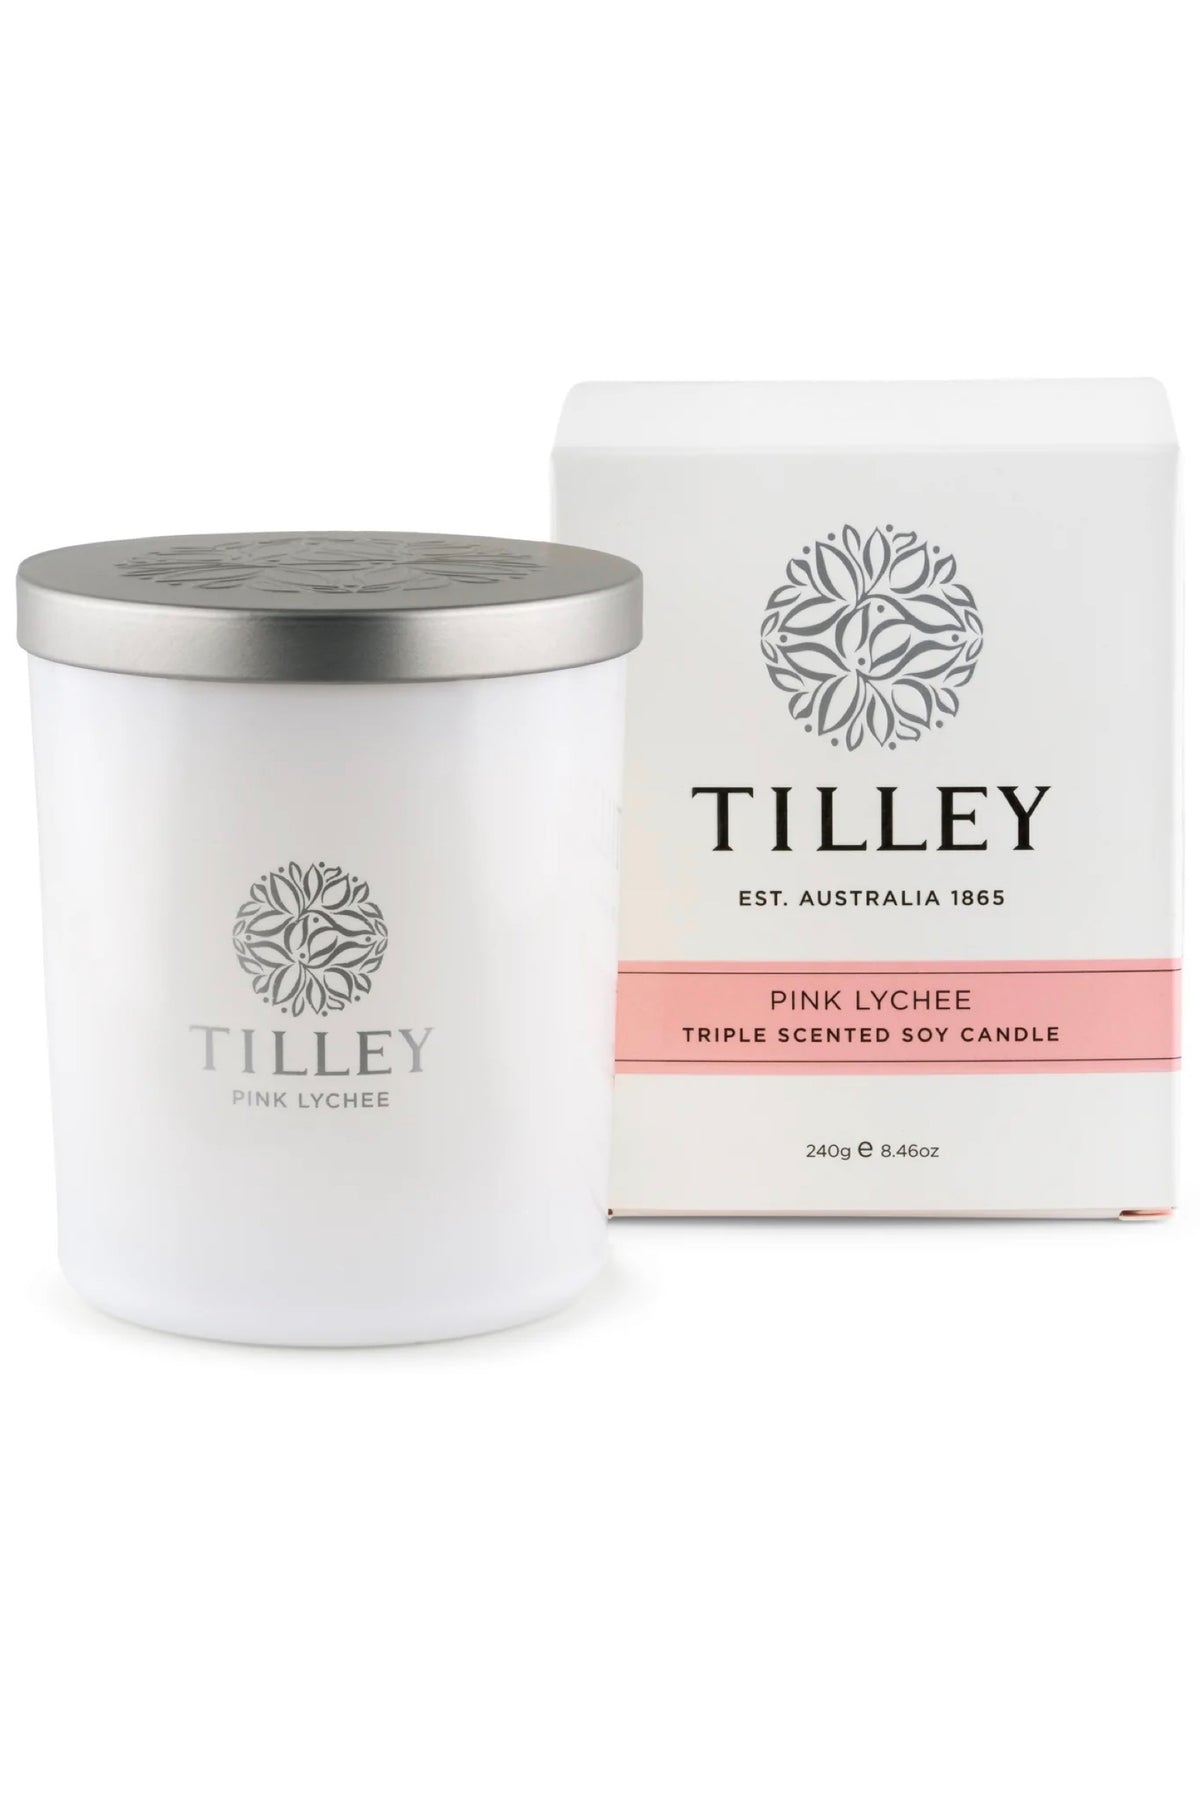 Tilley Soy Candle Pink Lychee